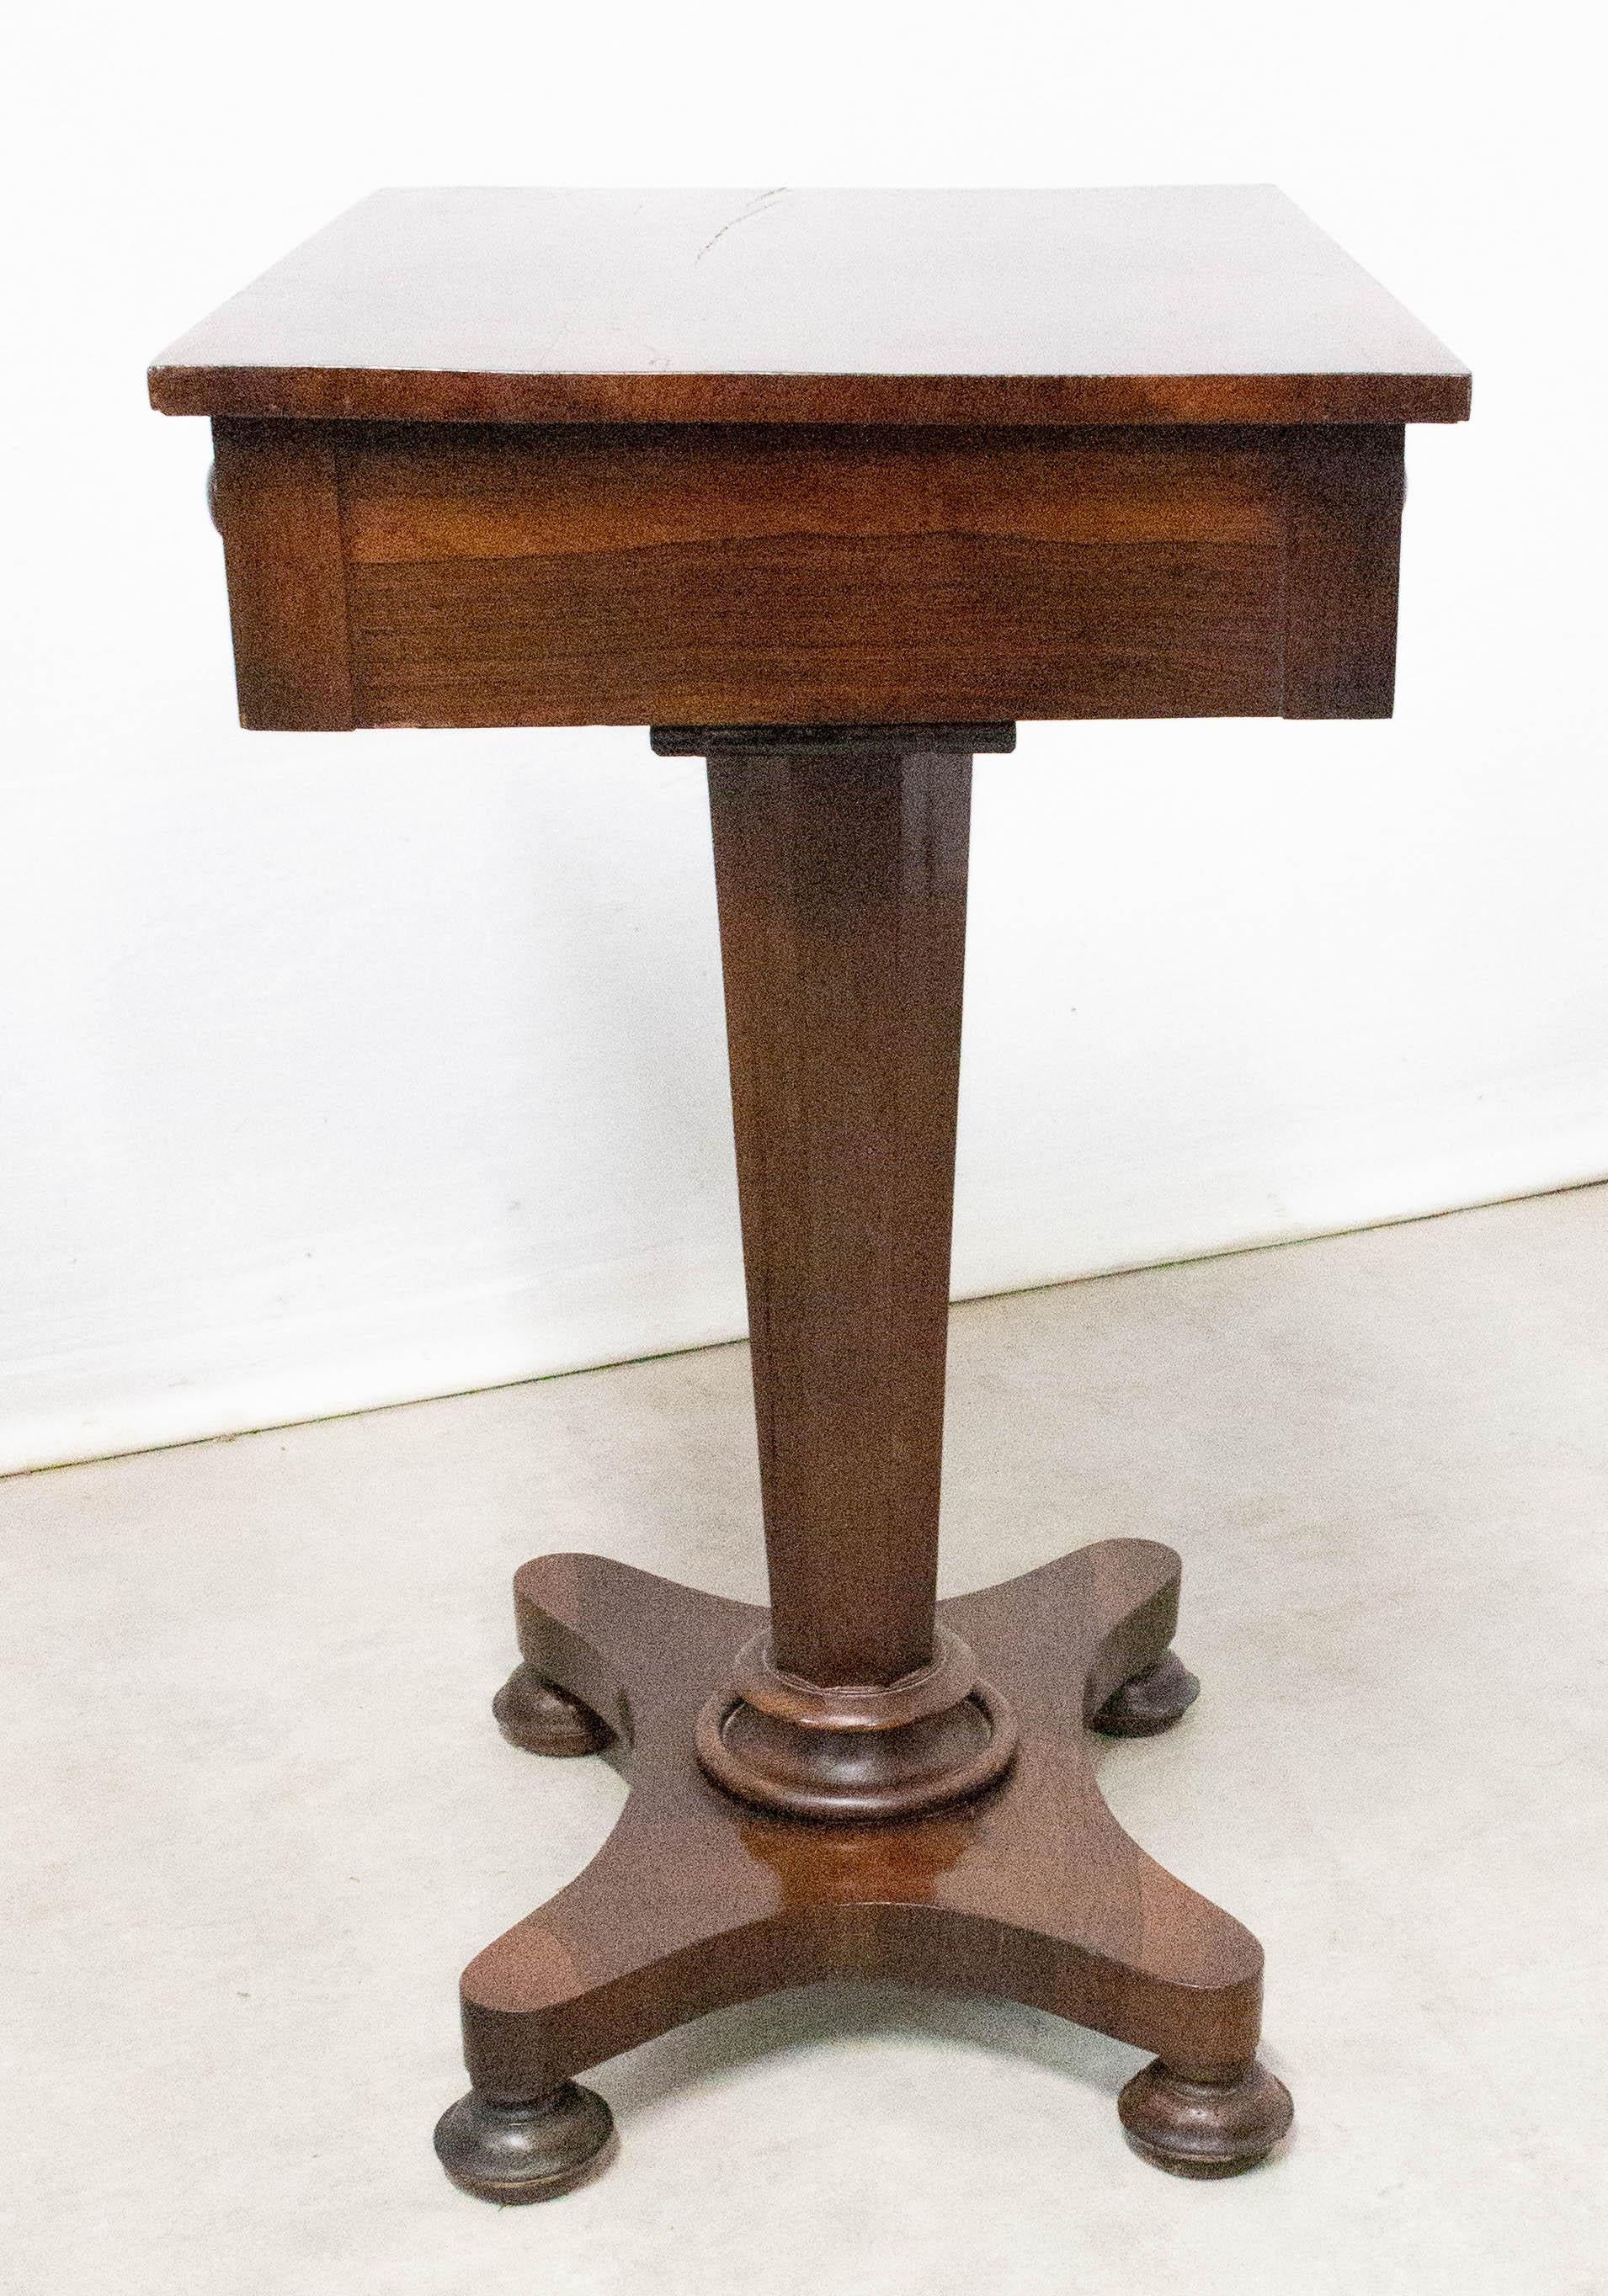 Wood English Victorian Sellette Side Table, Mid-19th Century For Sale